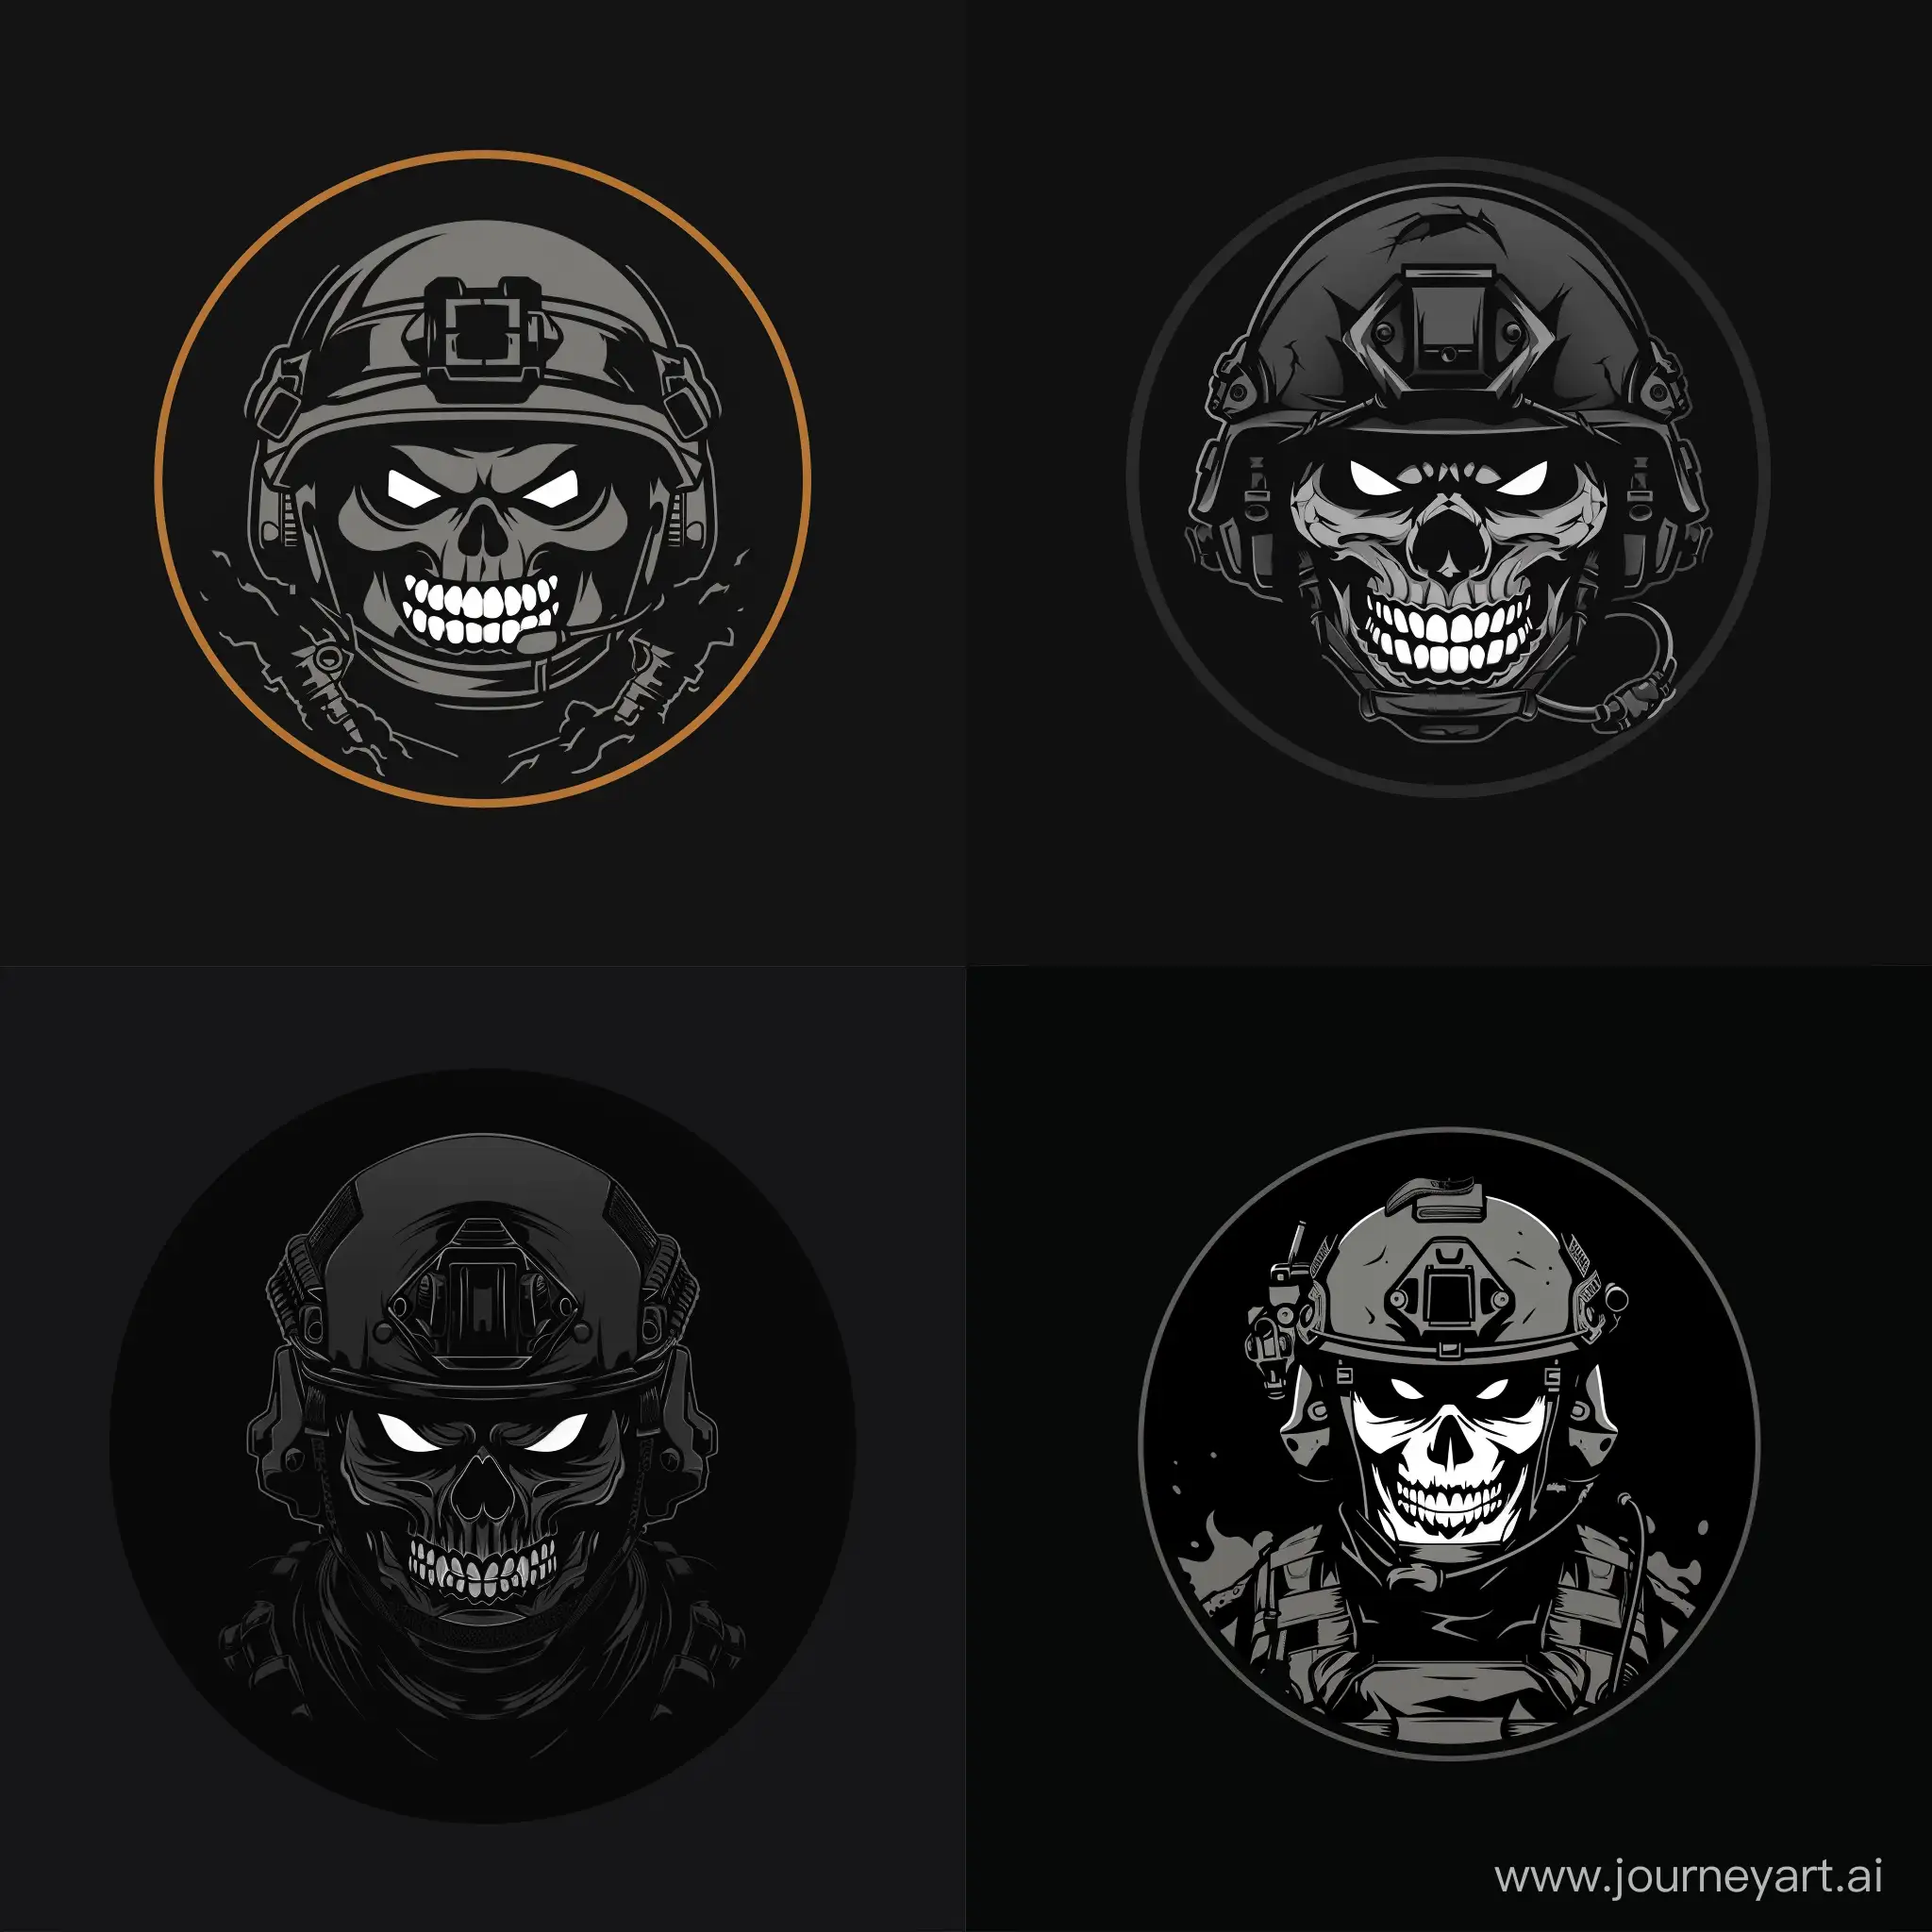 Modern-Madness-Angry-Smile-and-Skull-Mask-in-Minimalistic-Military-Design